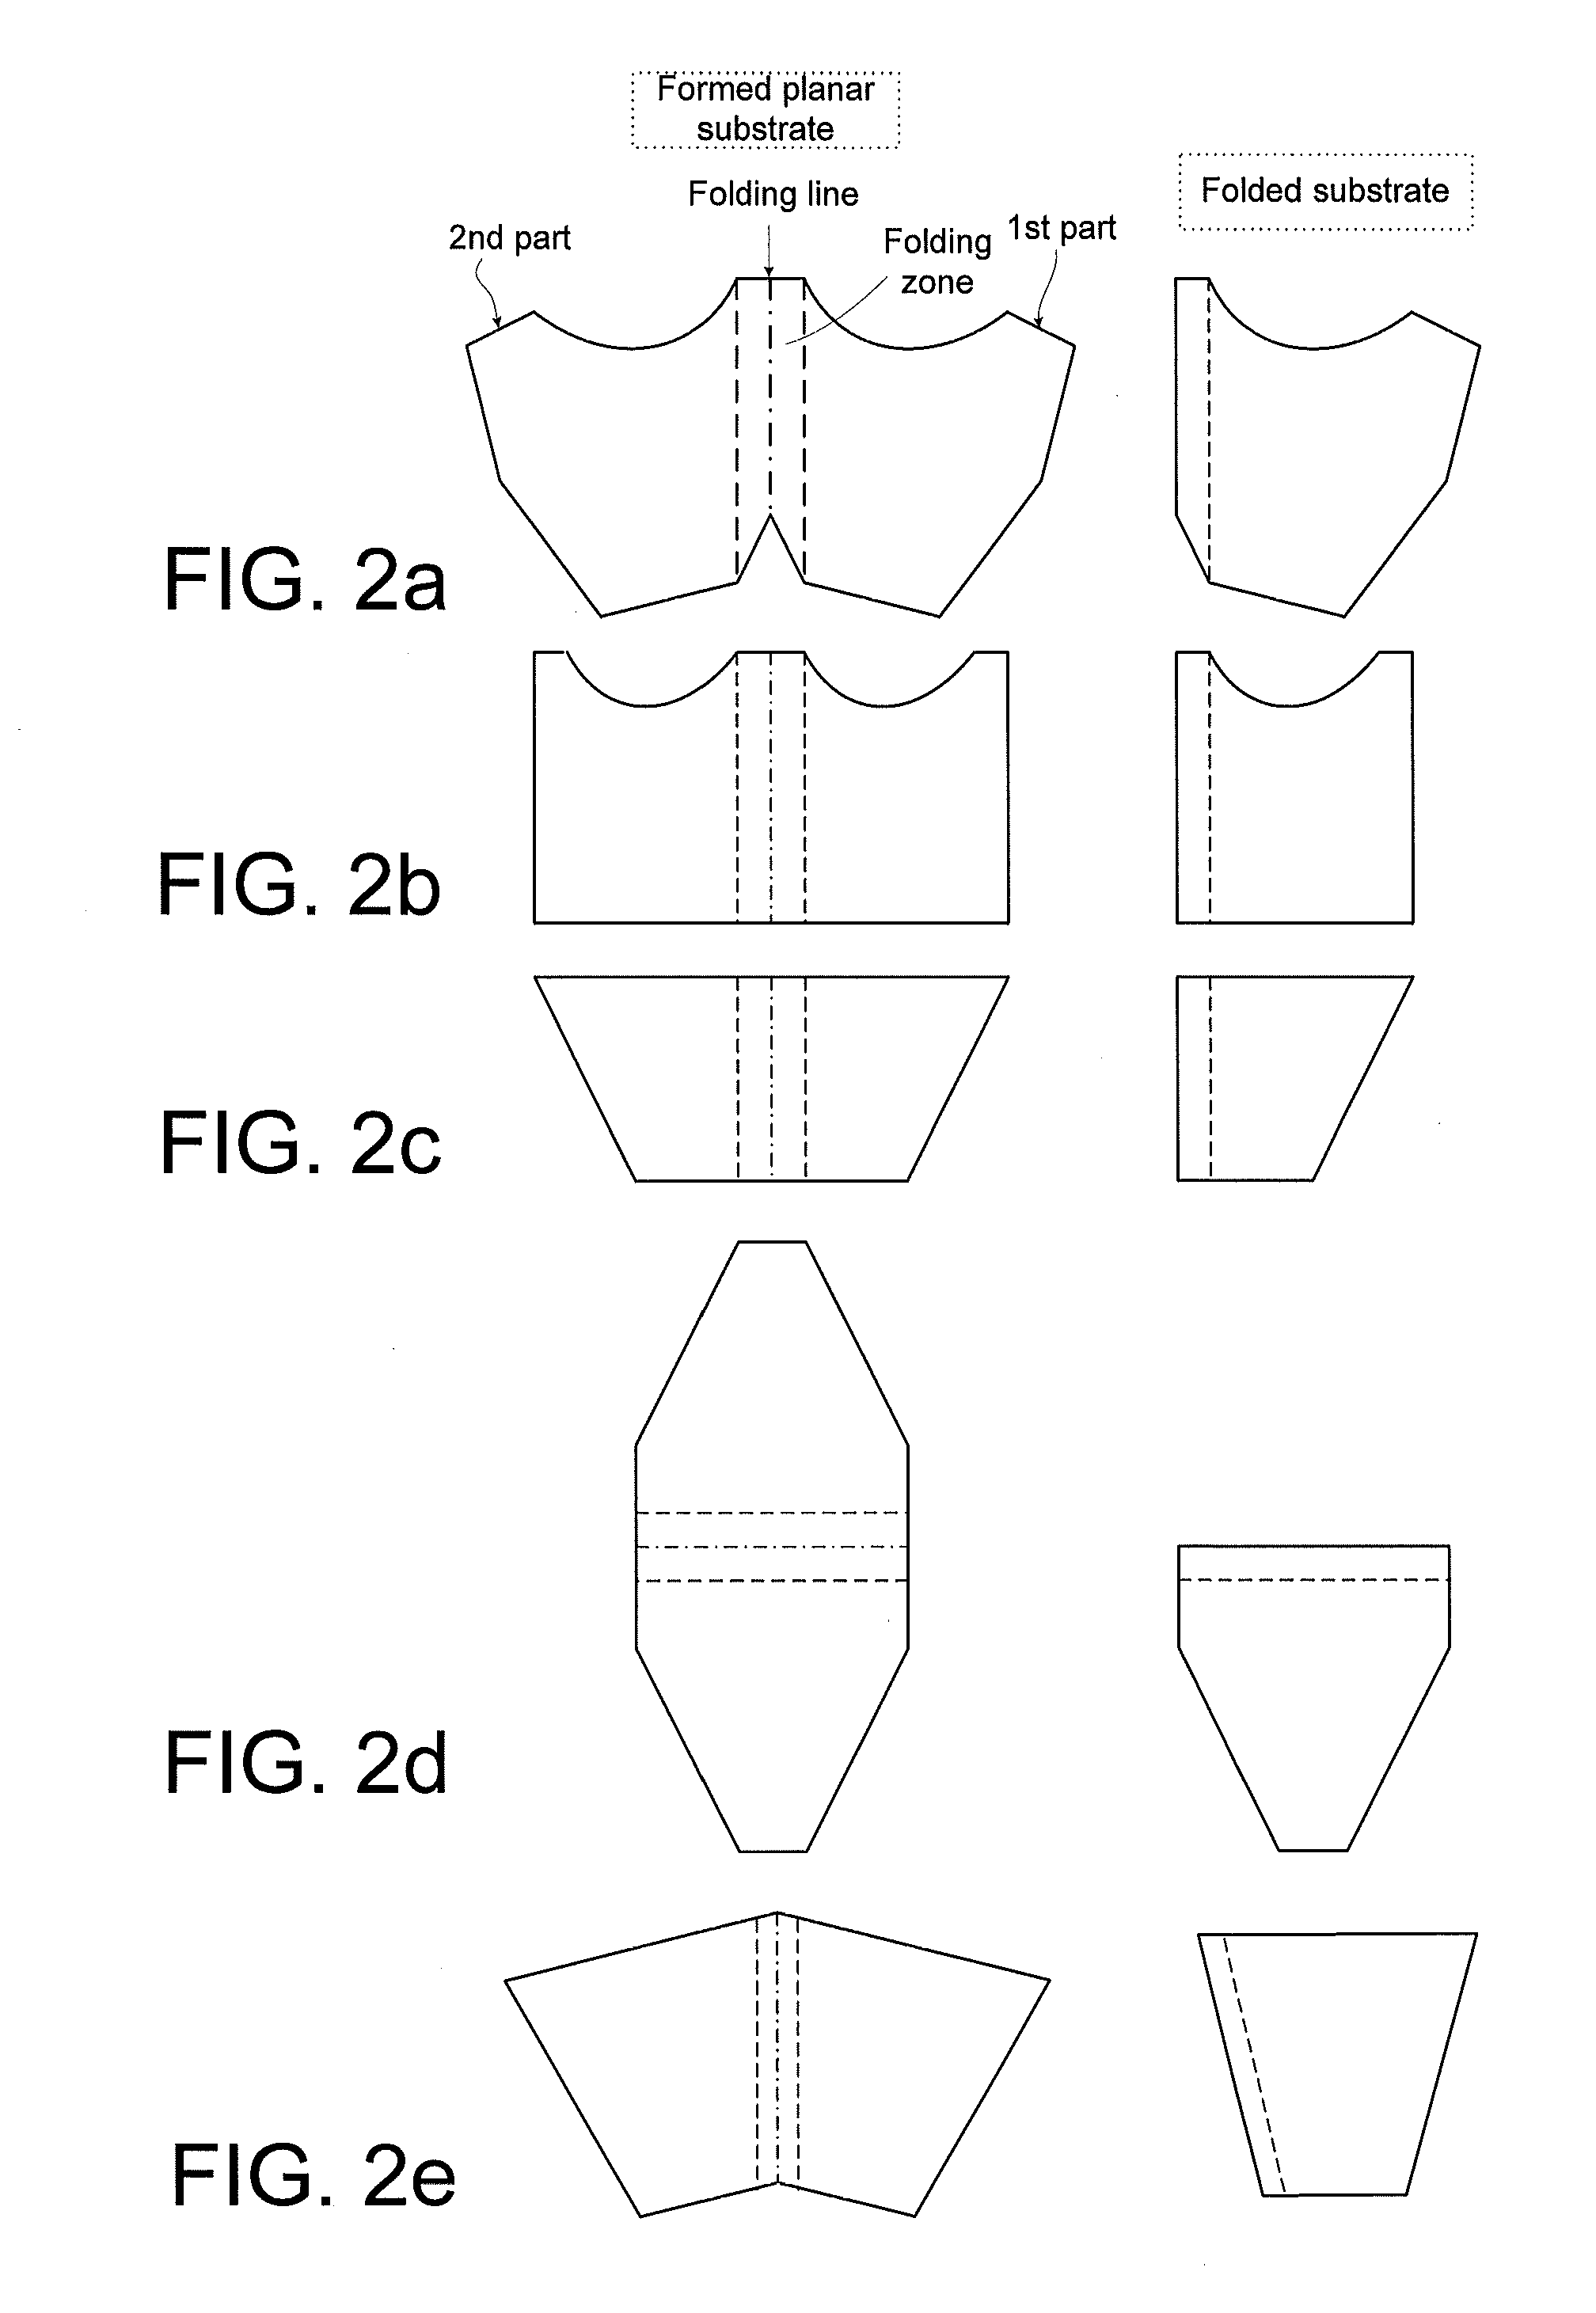 Portable electronic device comprising a folded substrate